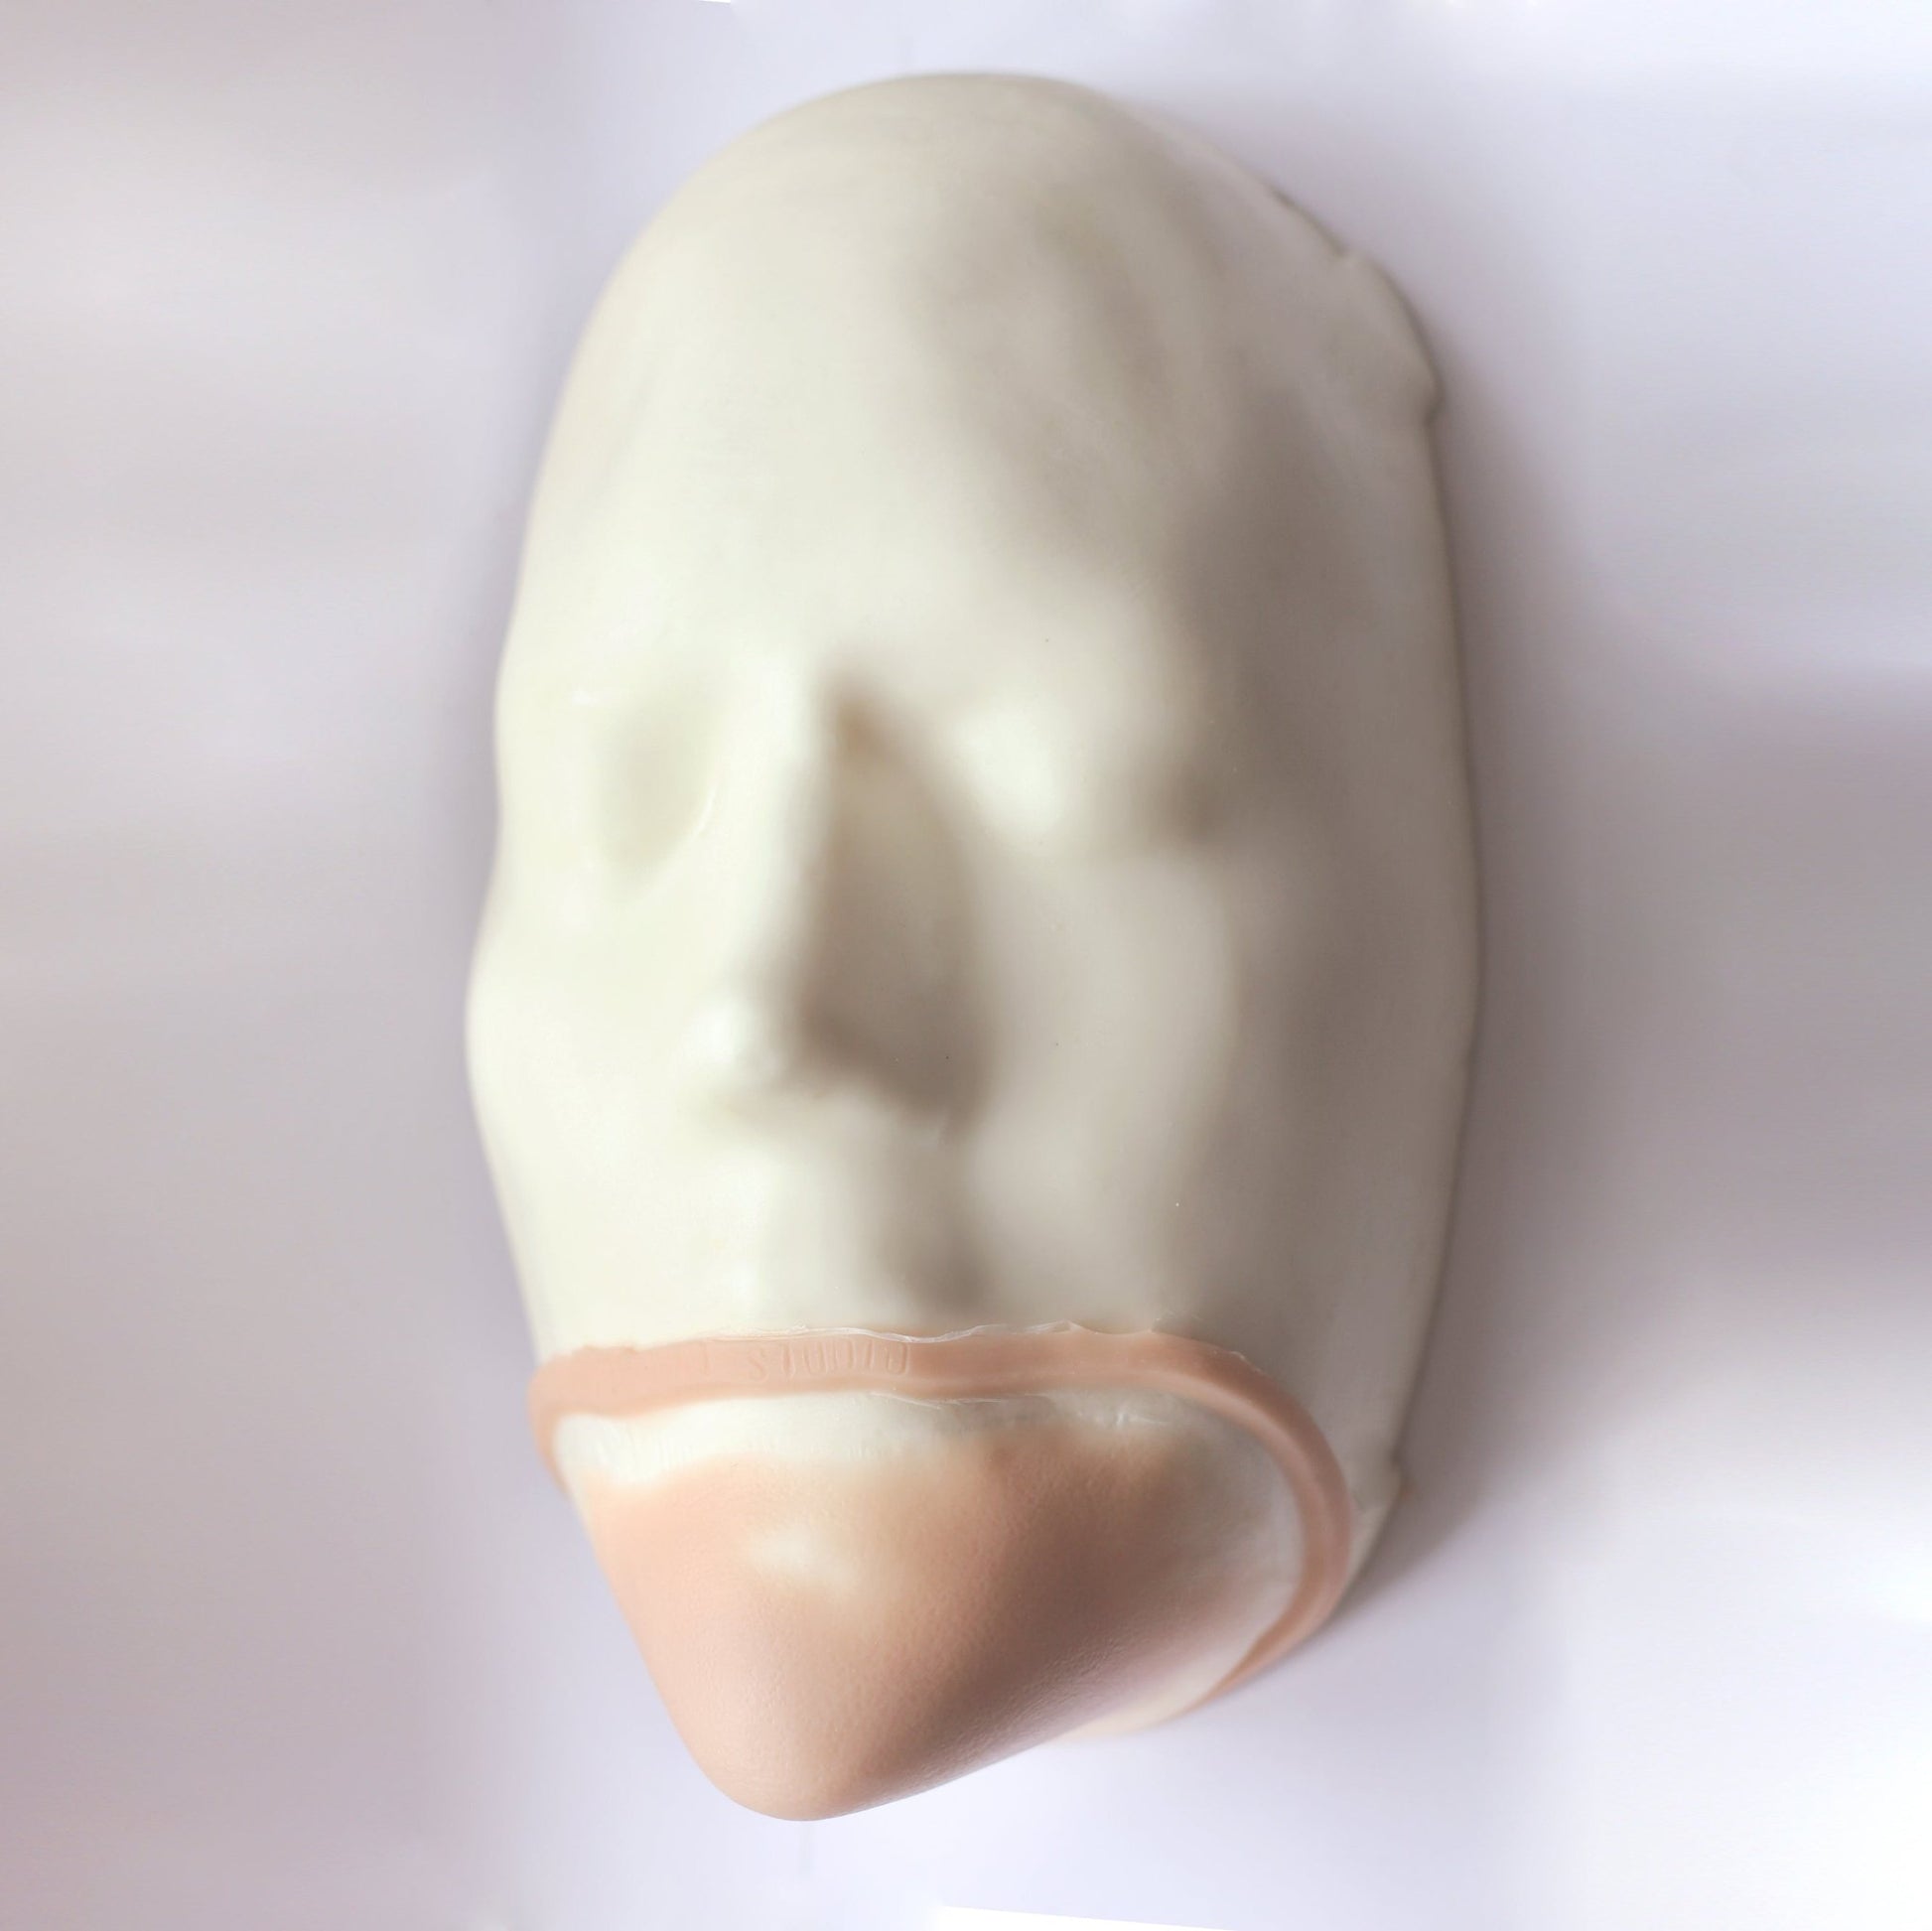 Pointy Chin - Silicone makeup prosthetic in vanilla shade on a white surface